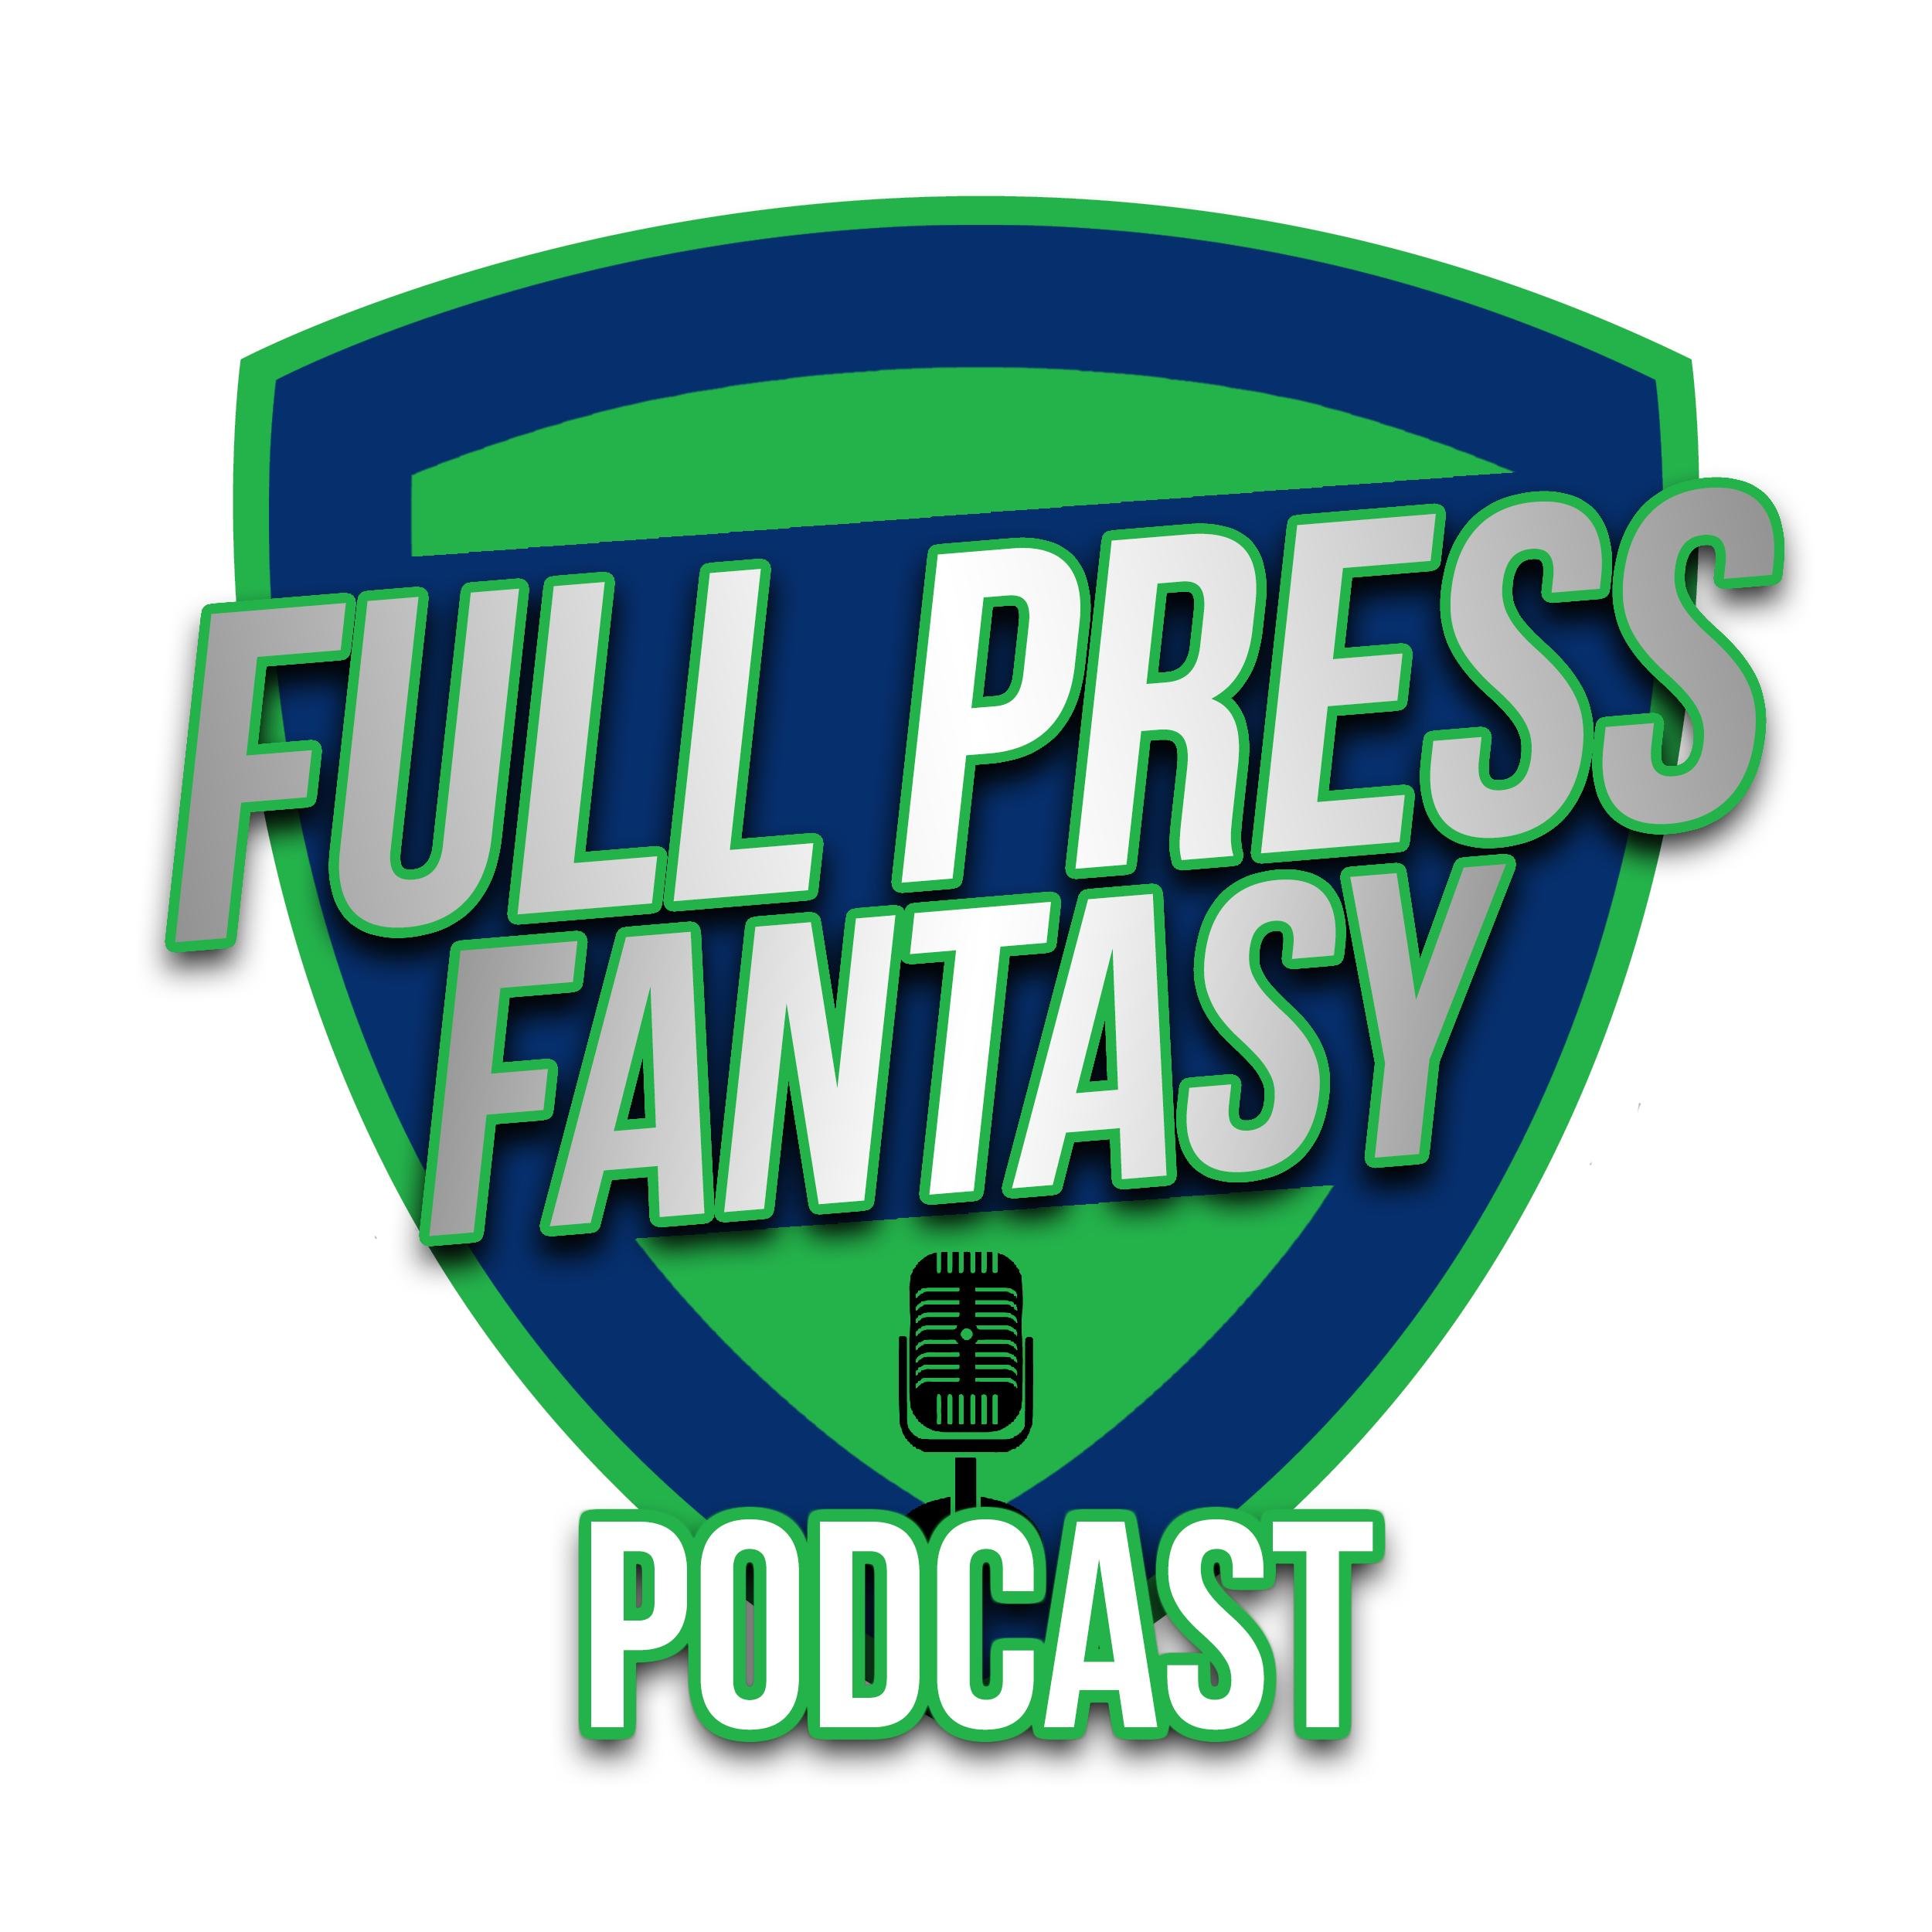 #BlackLivesMatter
#FantasyFootball Podcast for @FP_Coverage. Part of the @FullPressRadio Network. Hosted by @SenraSays, @TheRundown_BH and @Gcarmi21